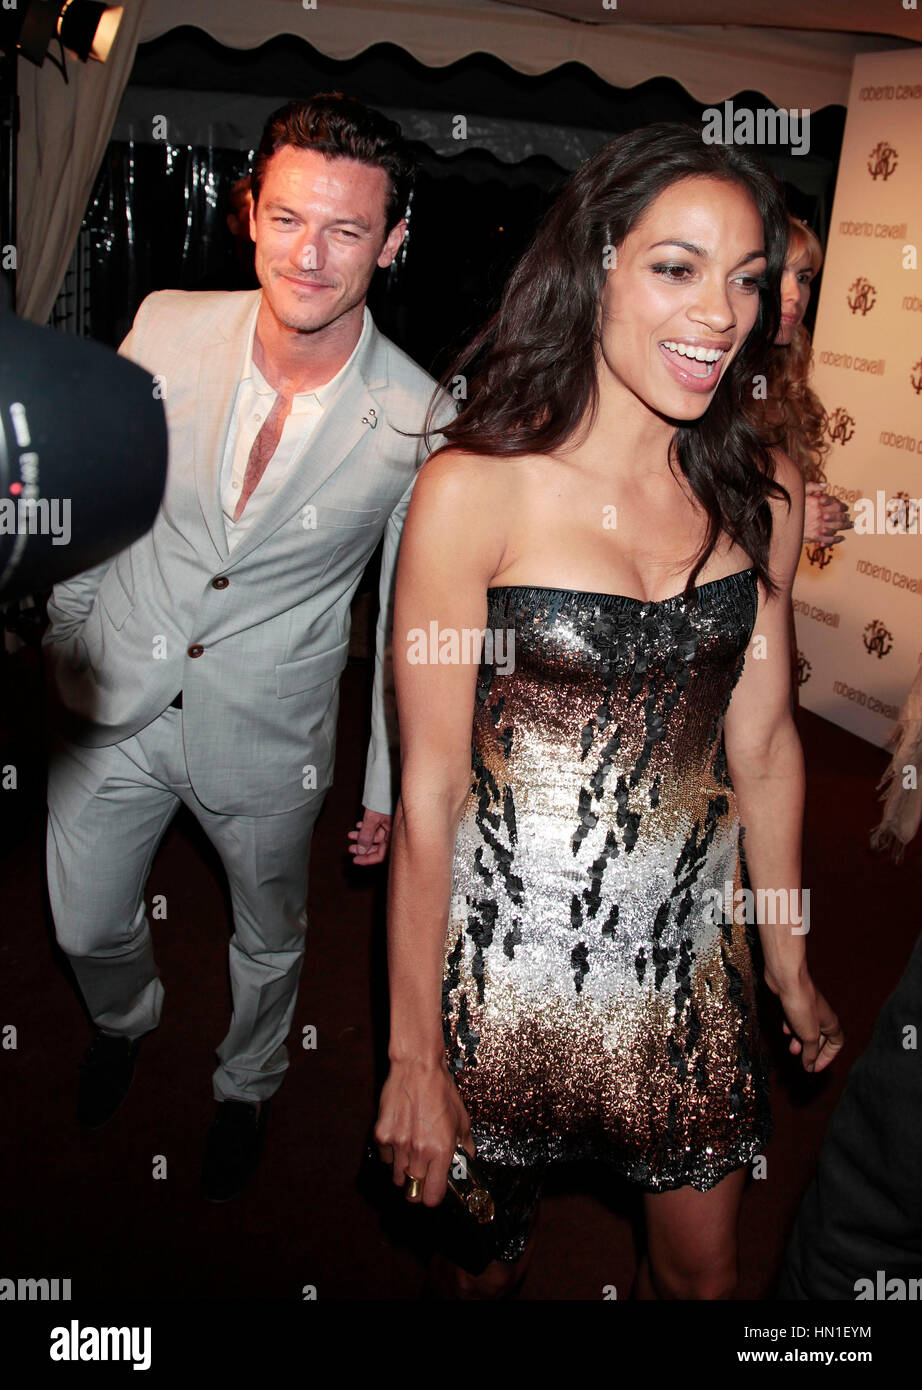 Luke Evans and Rosario Dawson leave the Roberto Cavalli party in Cannes, France on May 18, 2011. Photo by Francis Specker Stock Photo